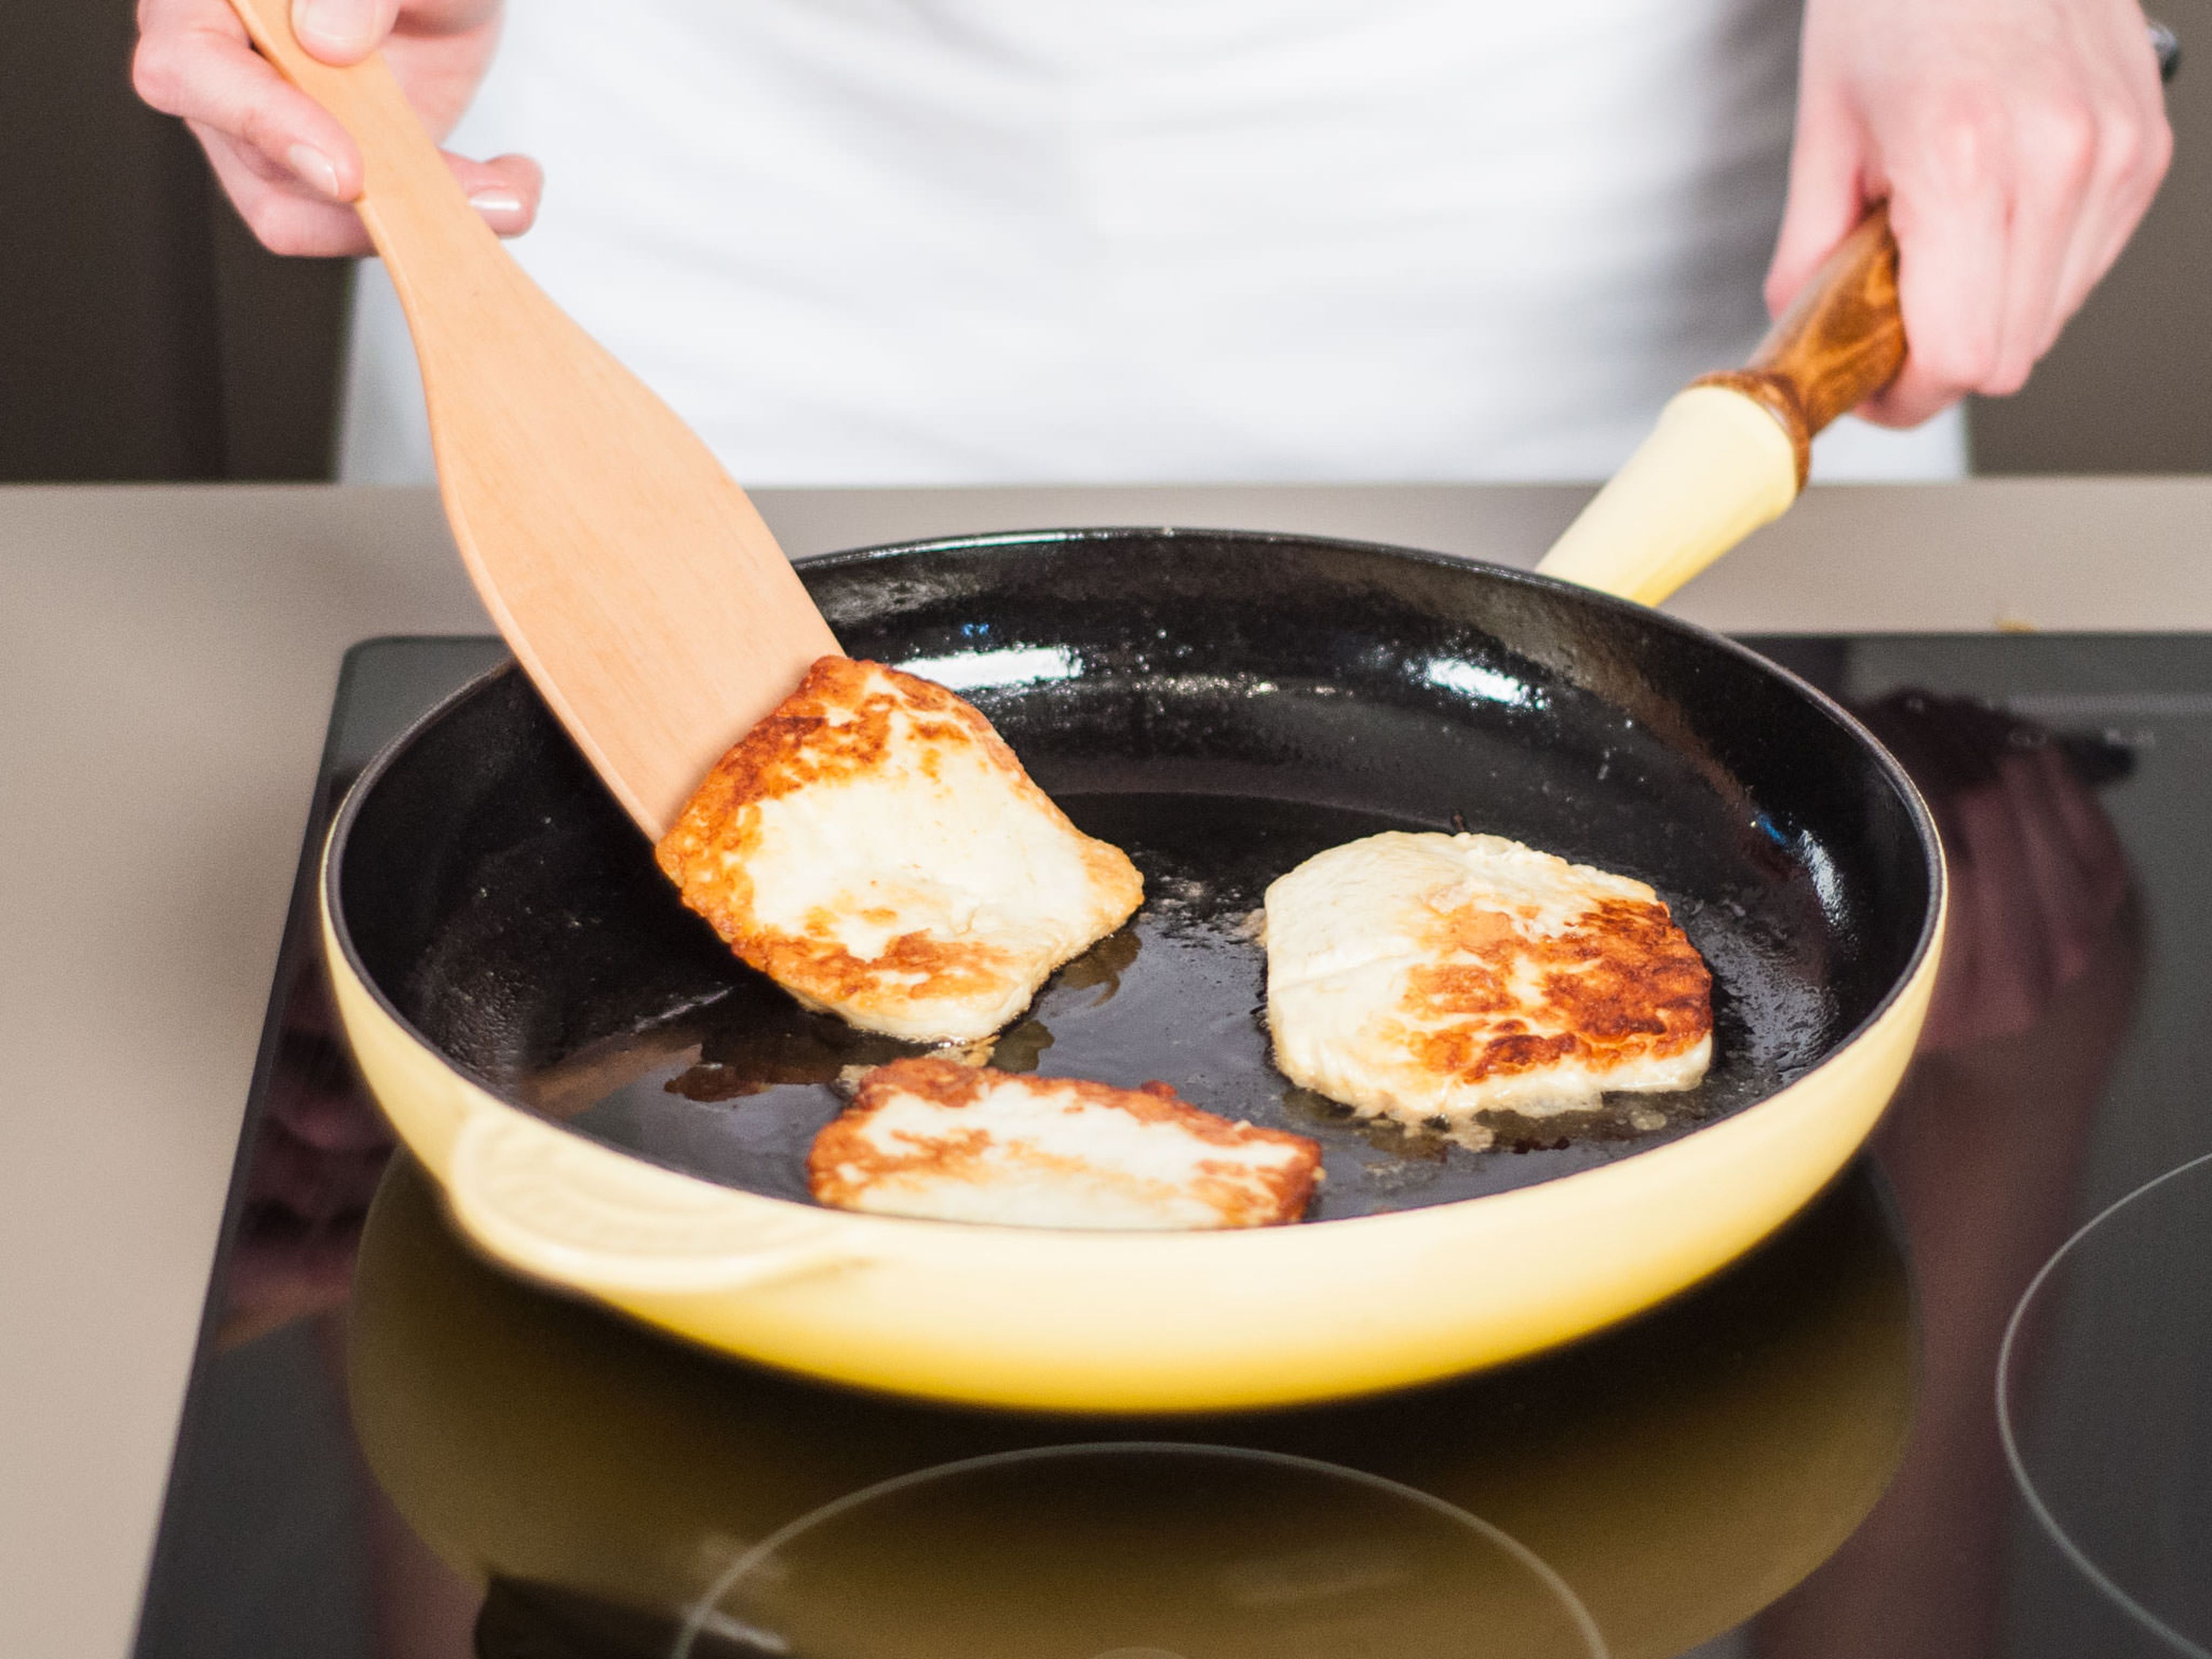 Heat vegetable oil in a frying pan over medium-high heat. Fry Halloumi cheese for approx. 2 – 3 min. on each side until lightly browned.